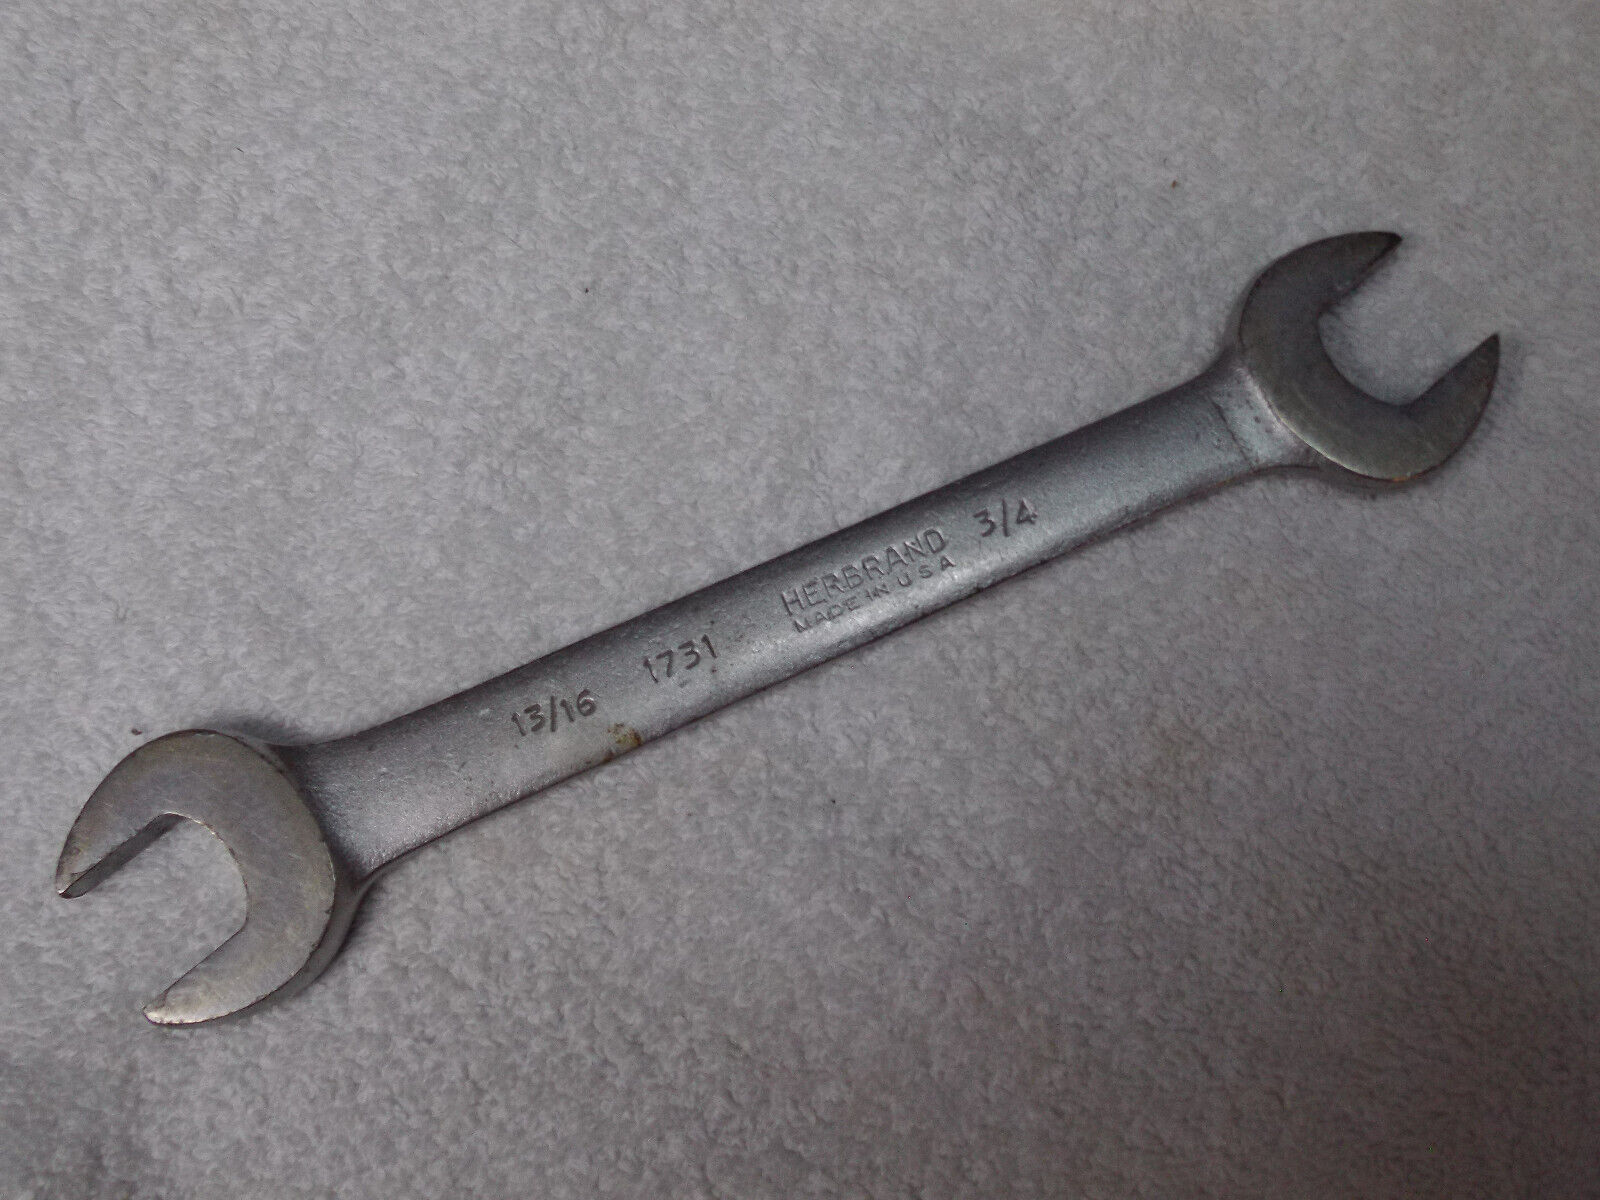 Herbrand Made in USA 1731 3/4 13/16 Open End Wrench 9 inches long